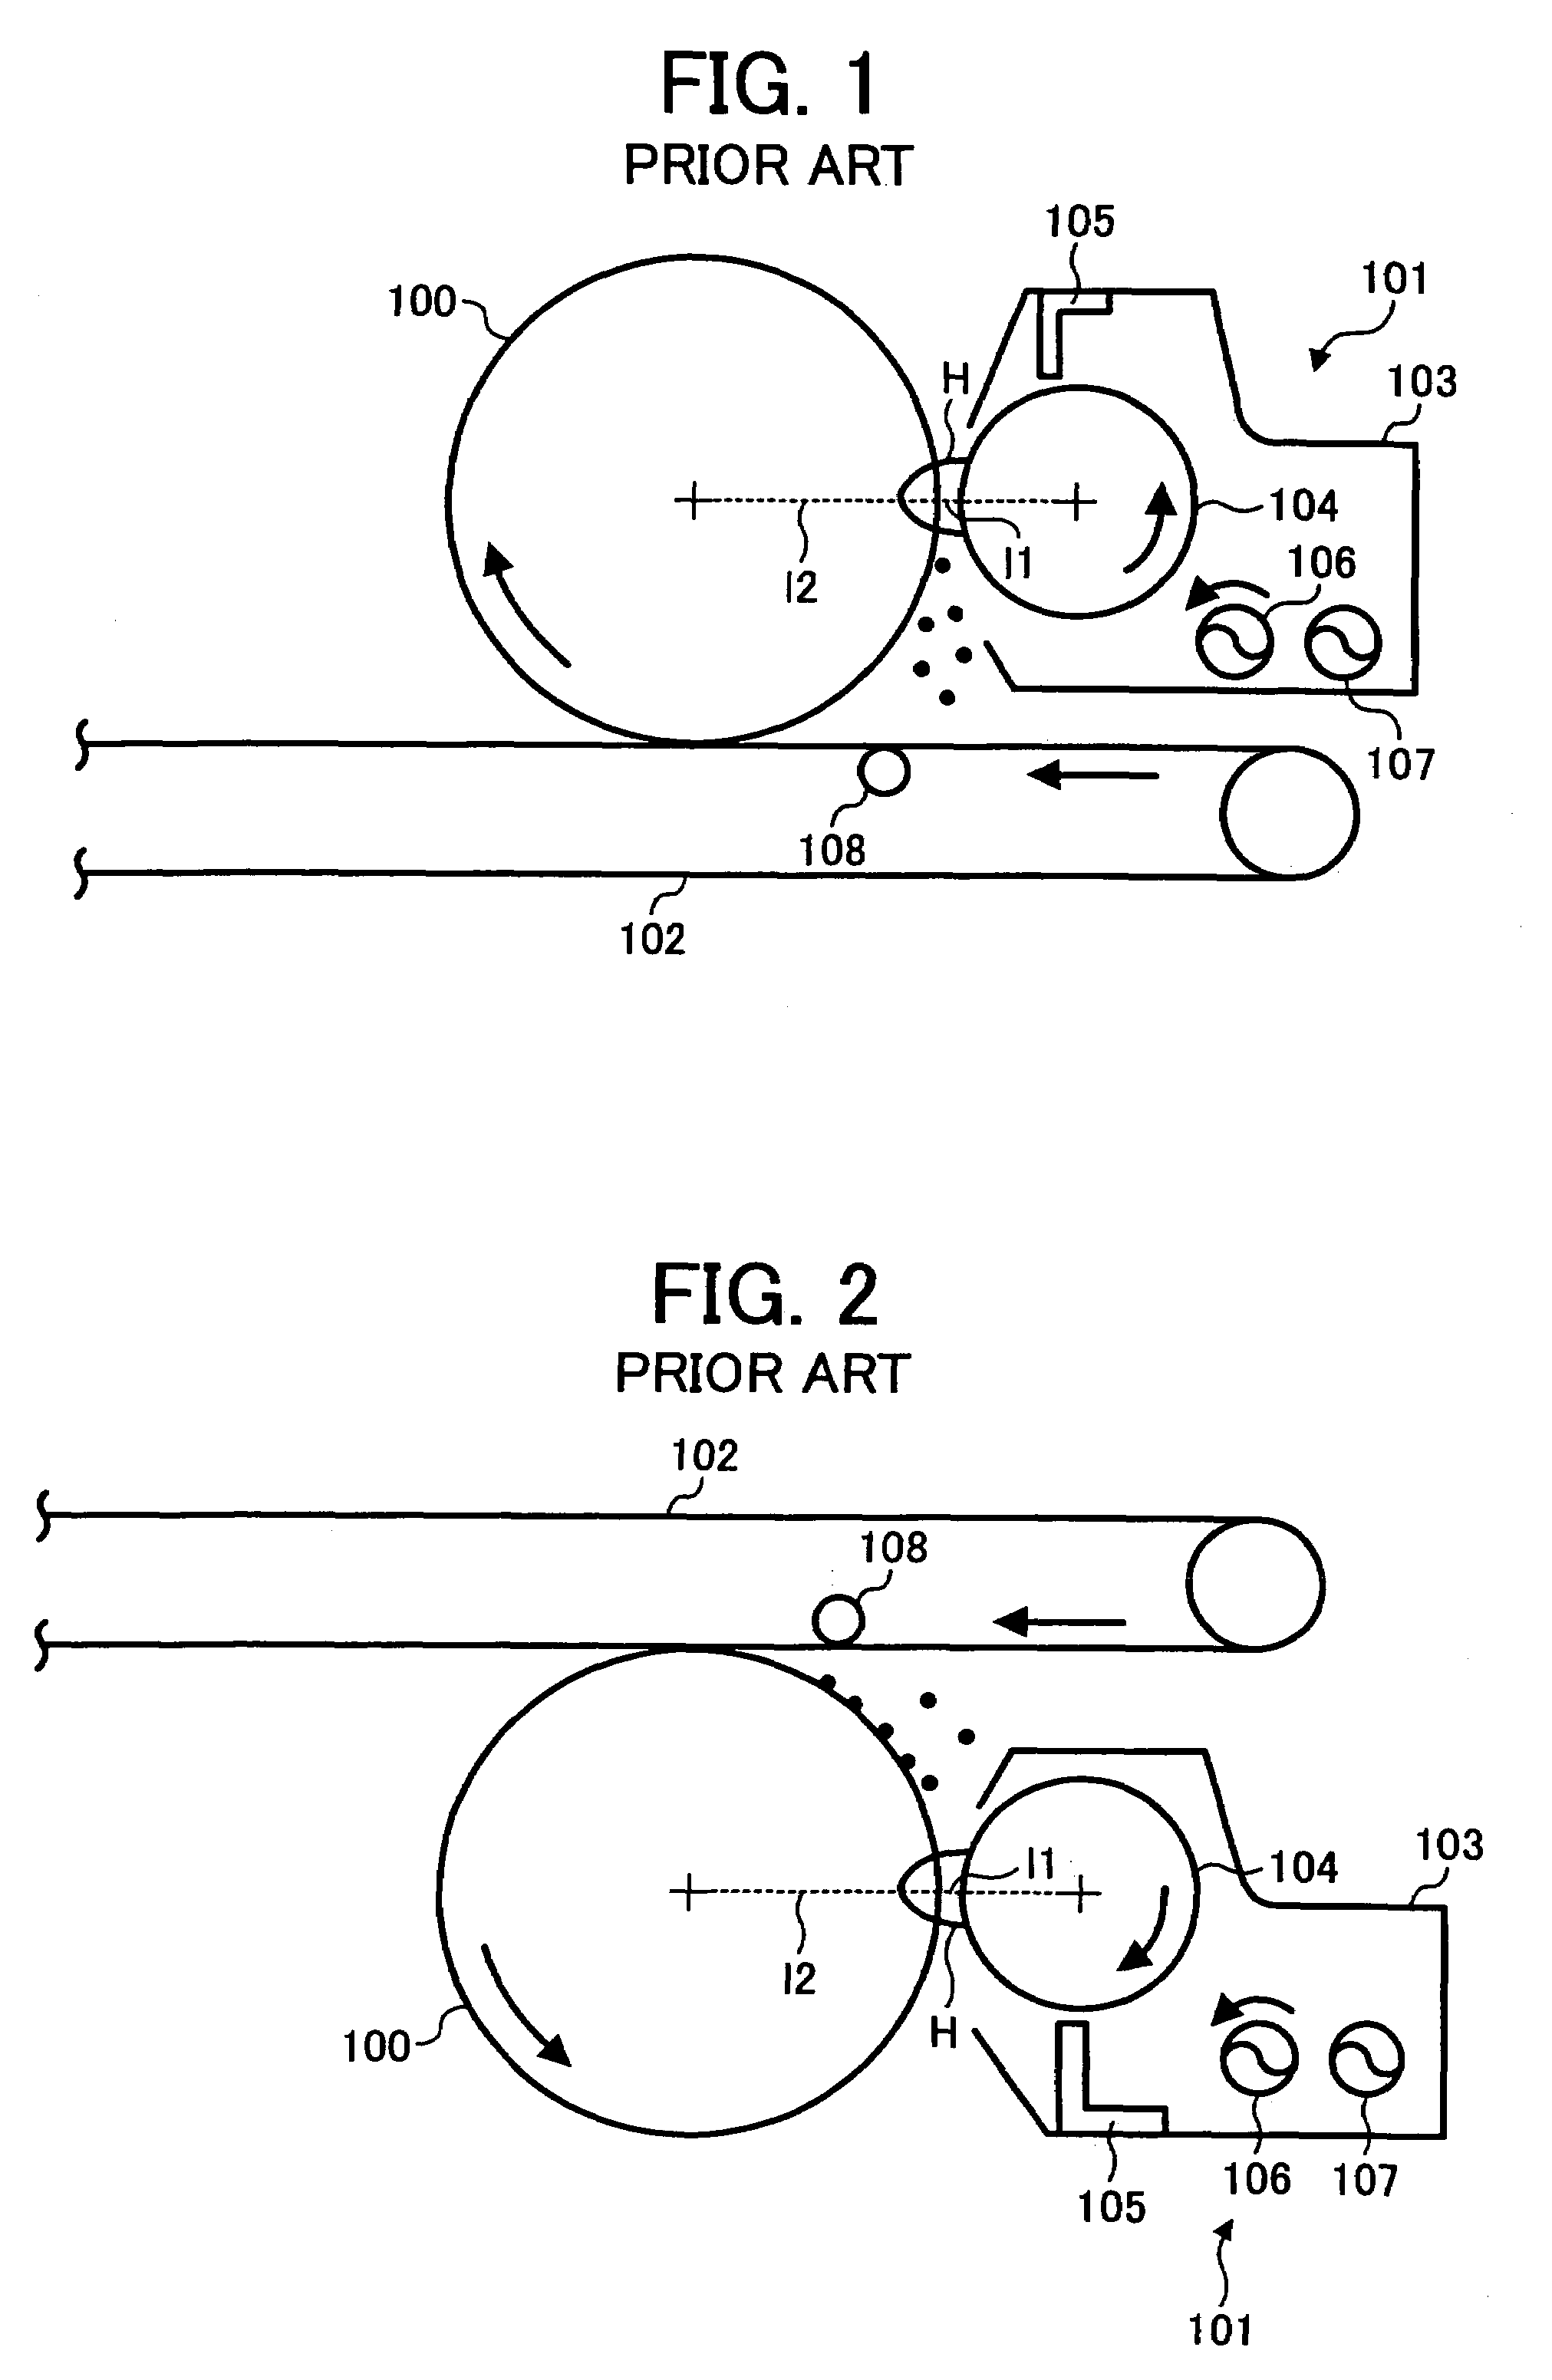 Image forming apparatus including a magnetic brush developing system using a two-component developer comprising toner and carrier